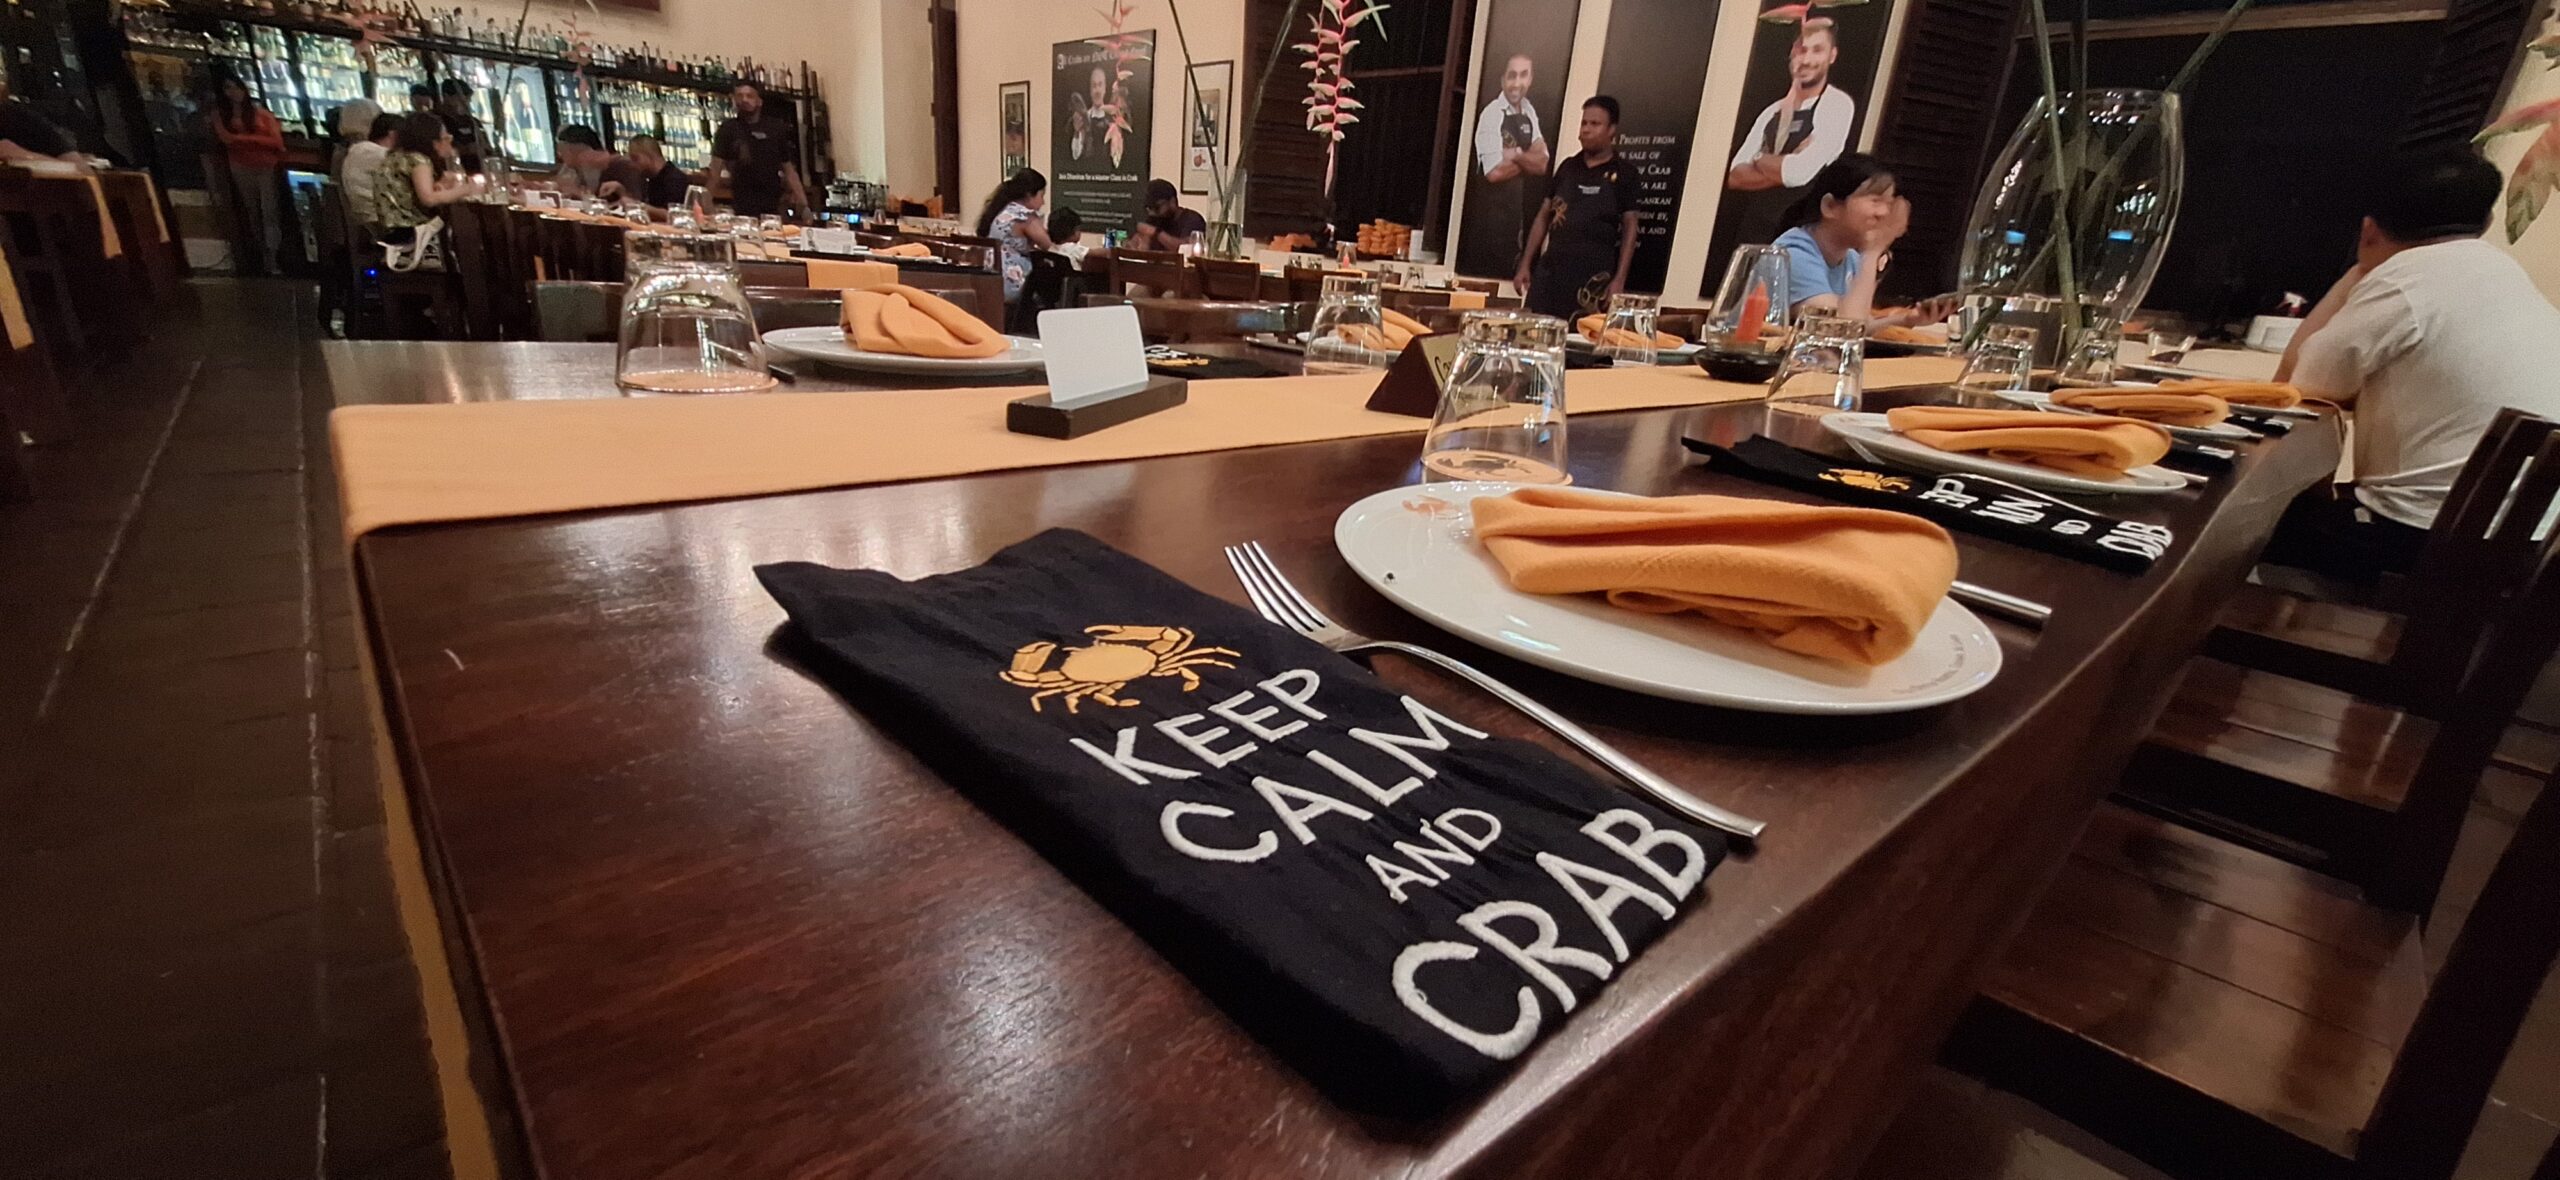 a table with a black towel on it